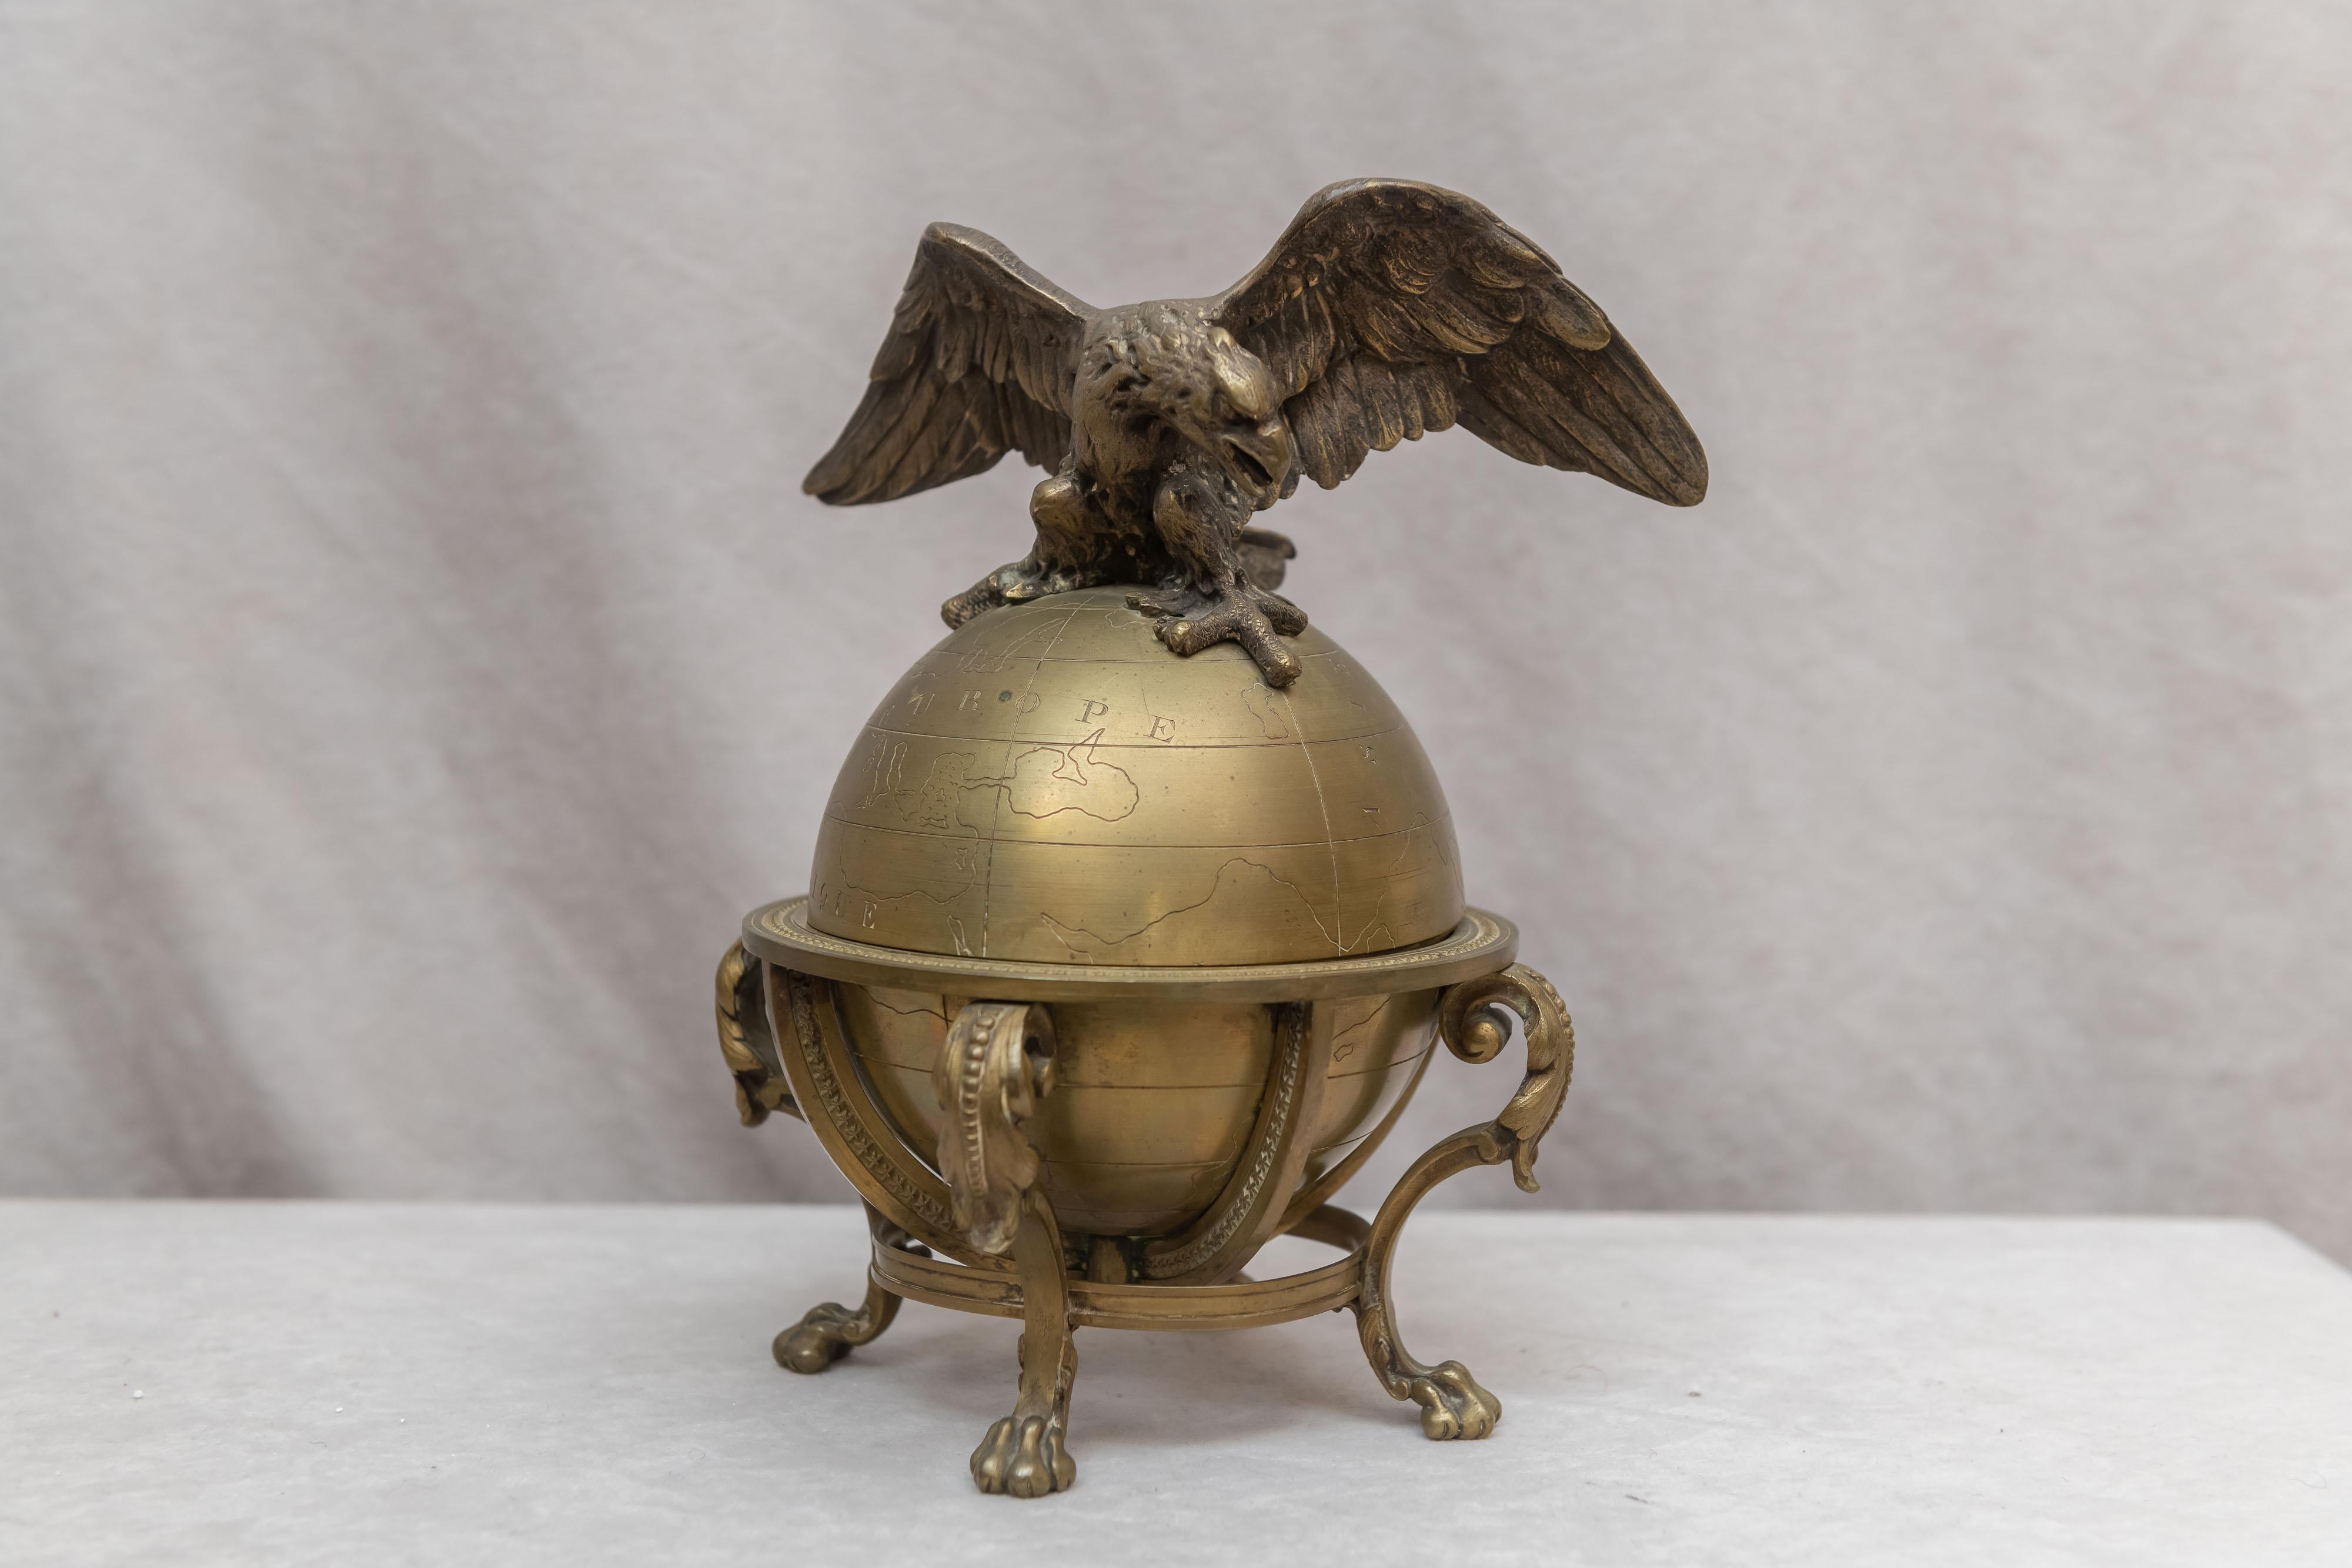 If you collect or like eagles and or globes, we found you a beauty. A very unusual well cast sculpture with amazingly the original glass insert for the ink. A subject you won't see everyday.